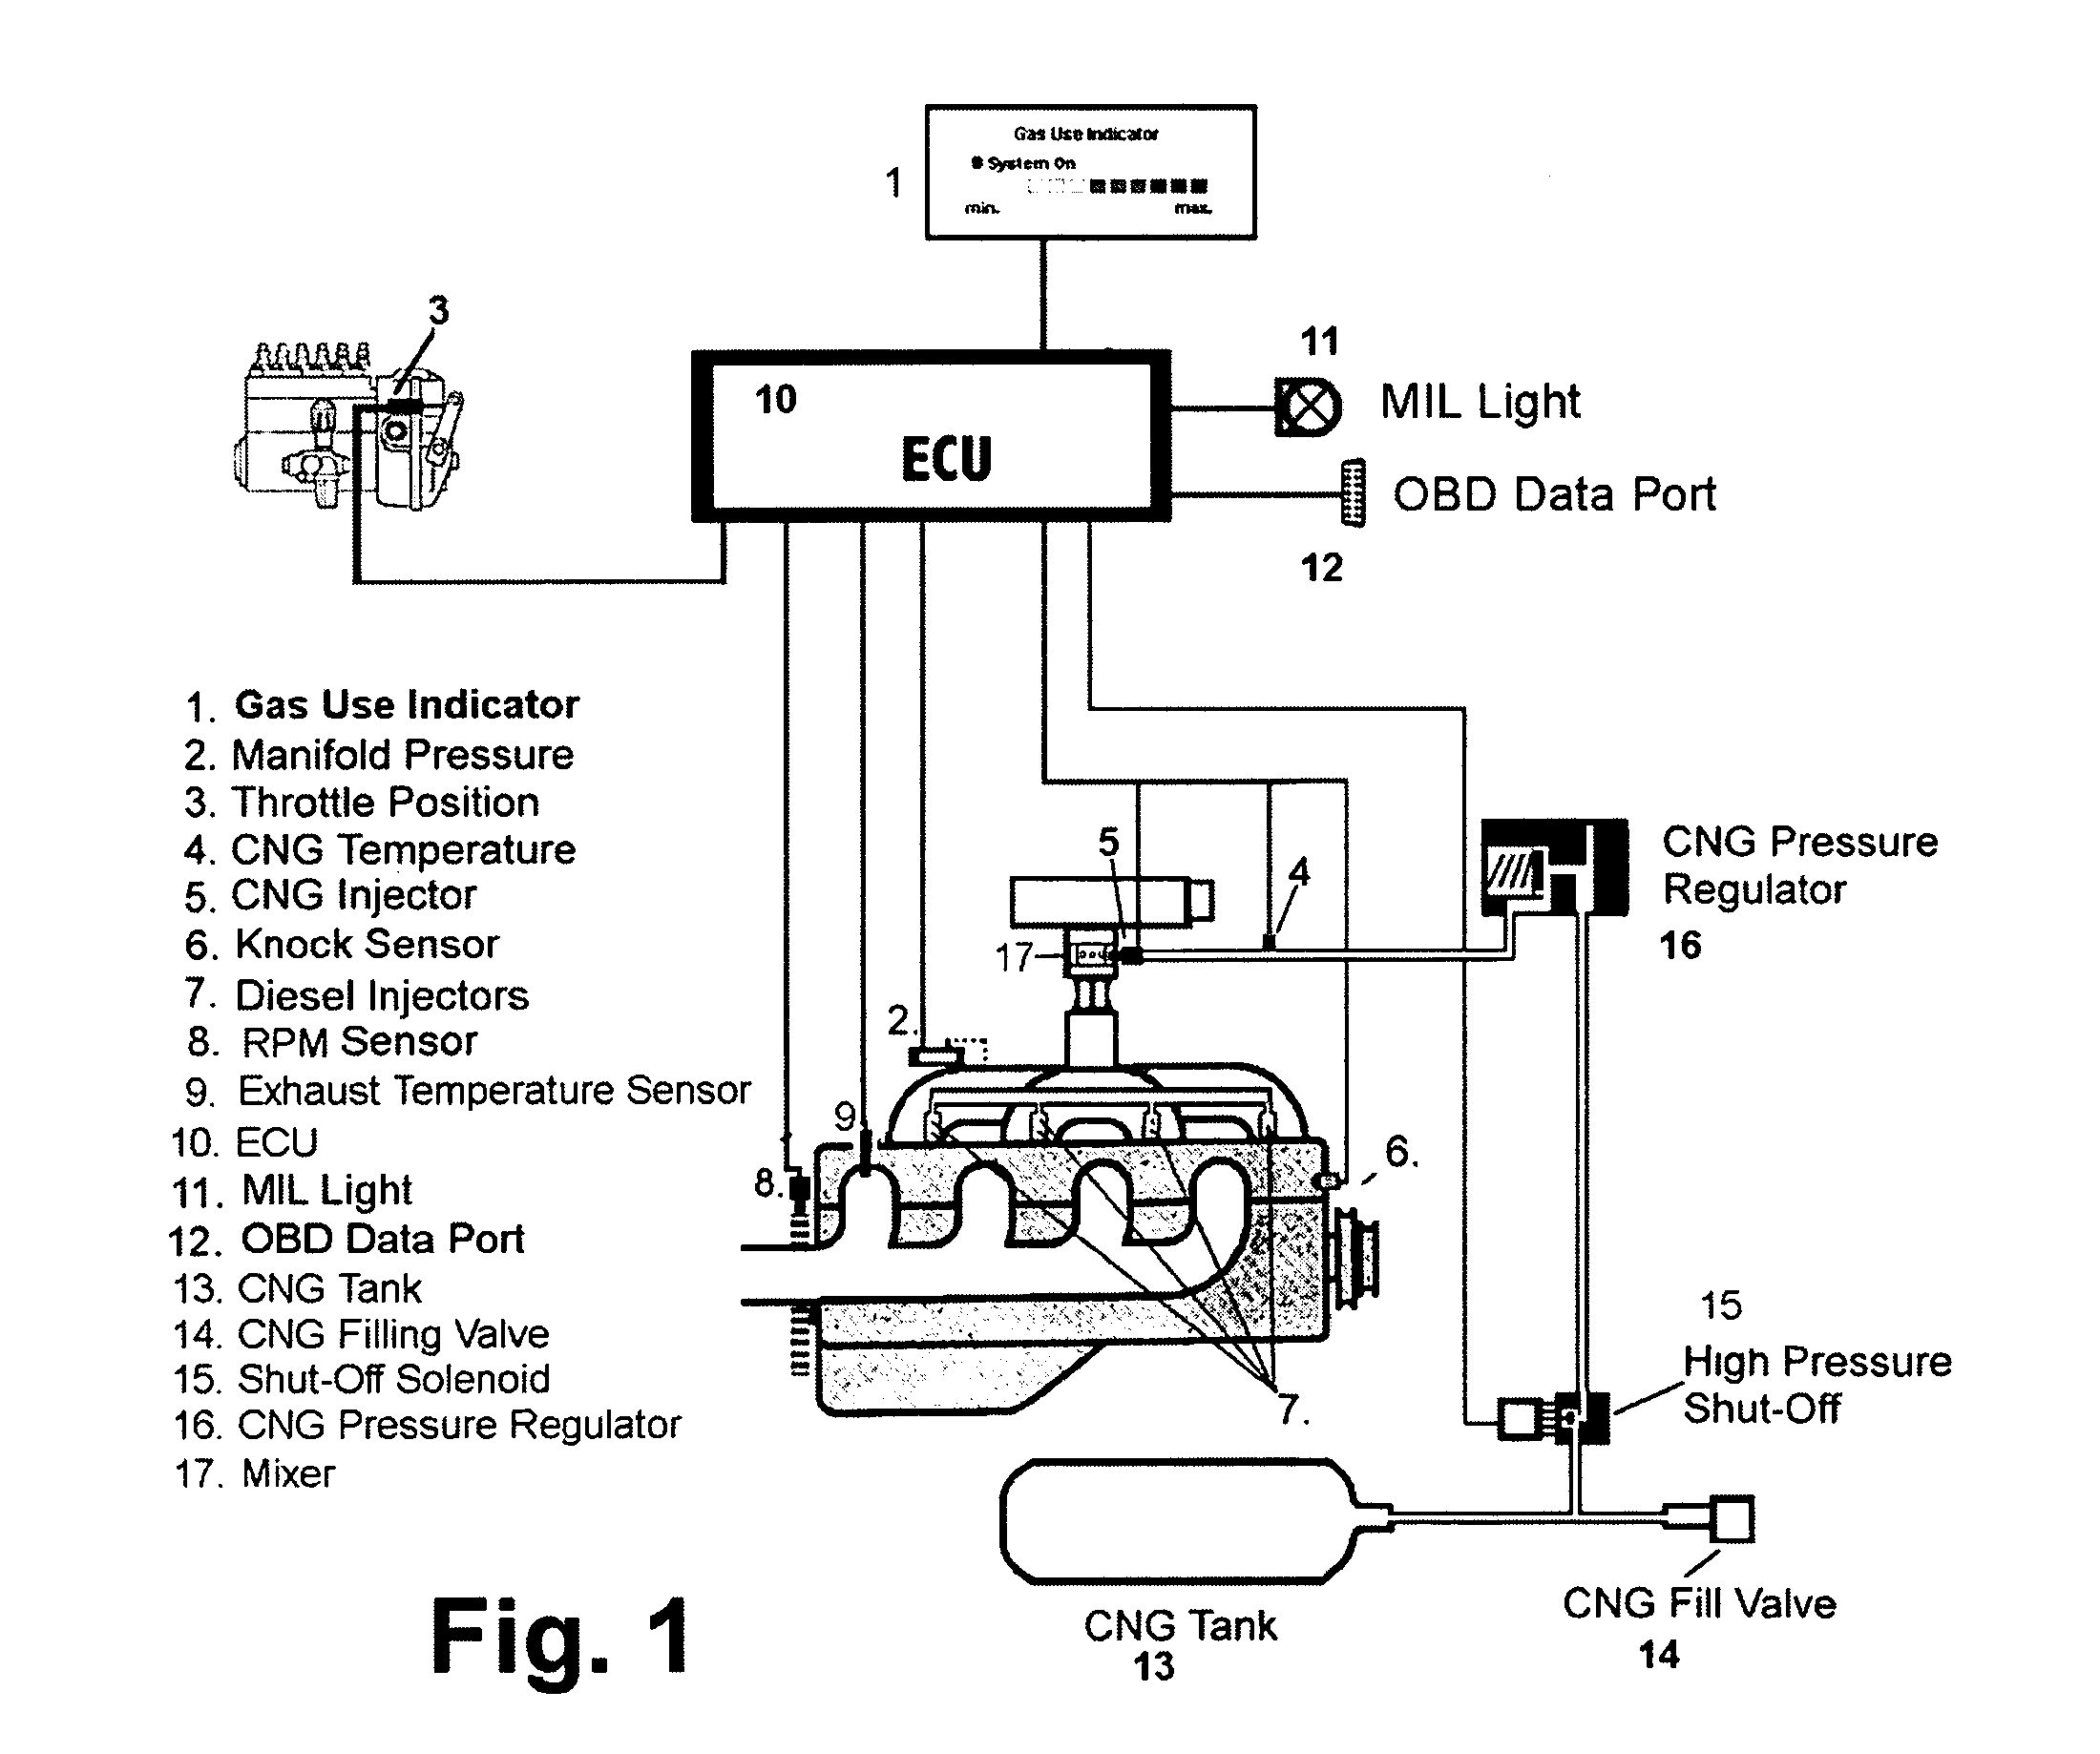 Multi-fuel engine conversion system and method